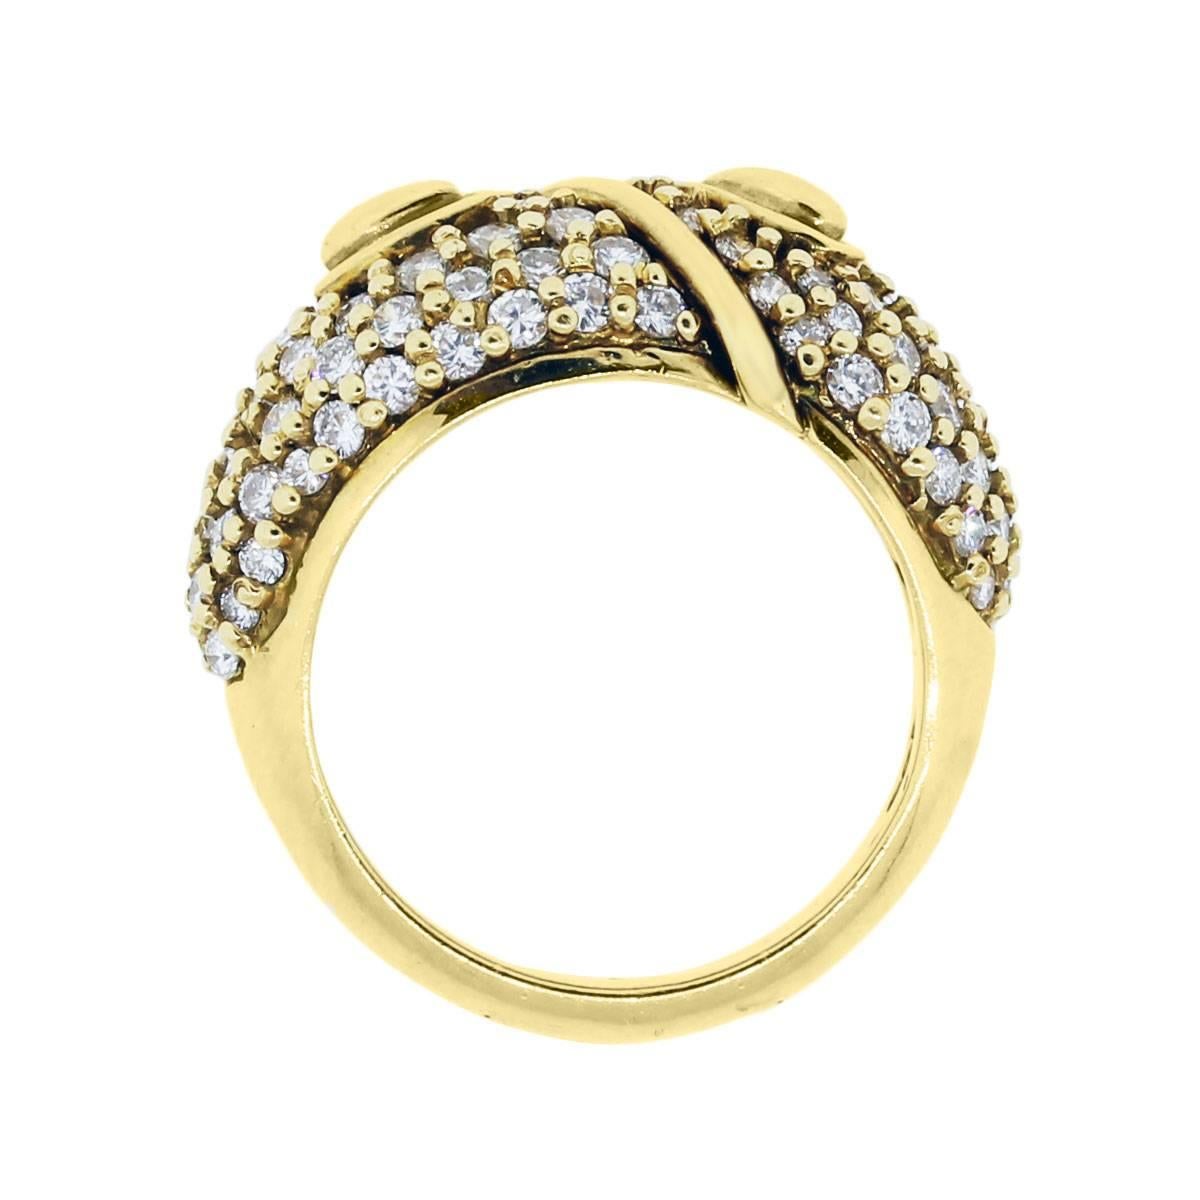 Designer	Hammerman Brothers
Material	18k Yellow Gold
Diamond Details	Approximately 1.81ctw of round brilliant diamonds. Diamonds are G/H in color and VS in clarity.
Ring Measurements	0.93